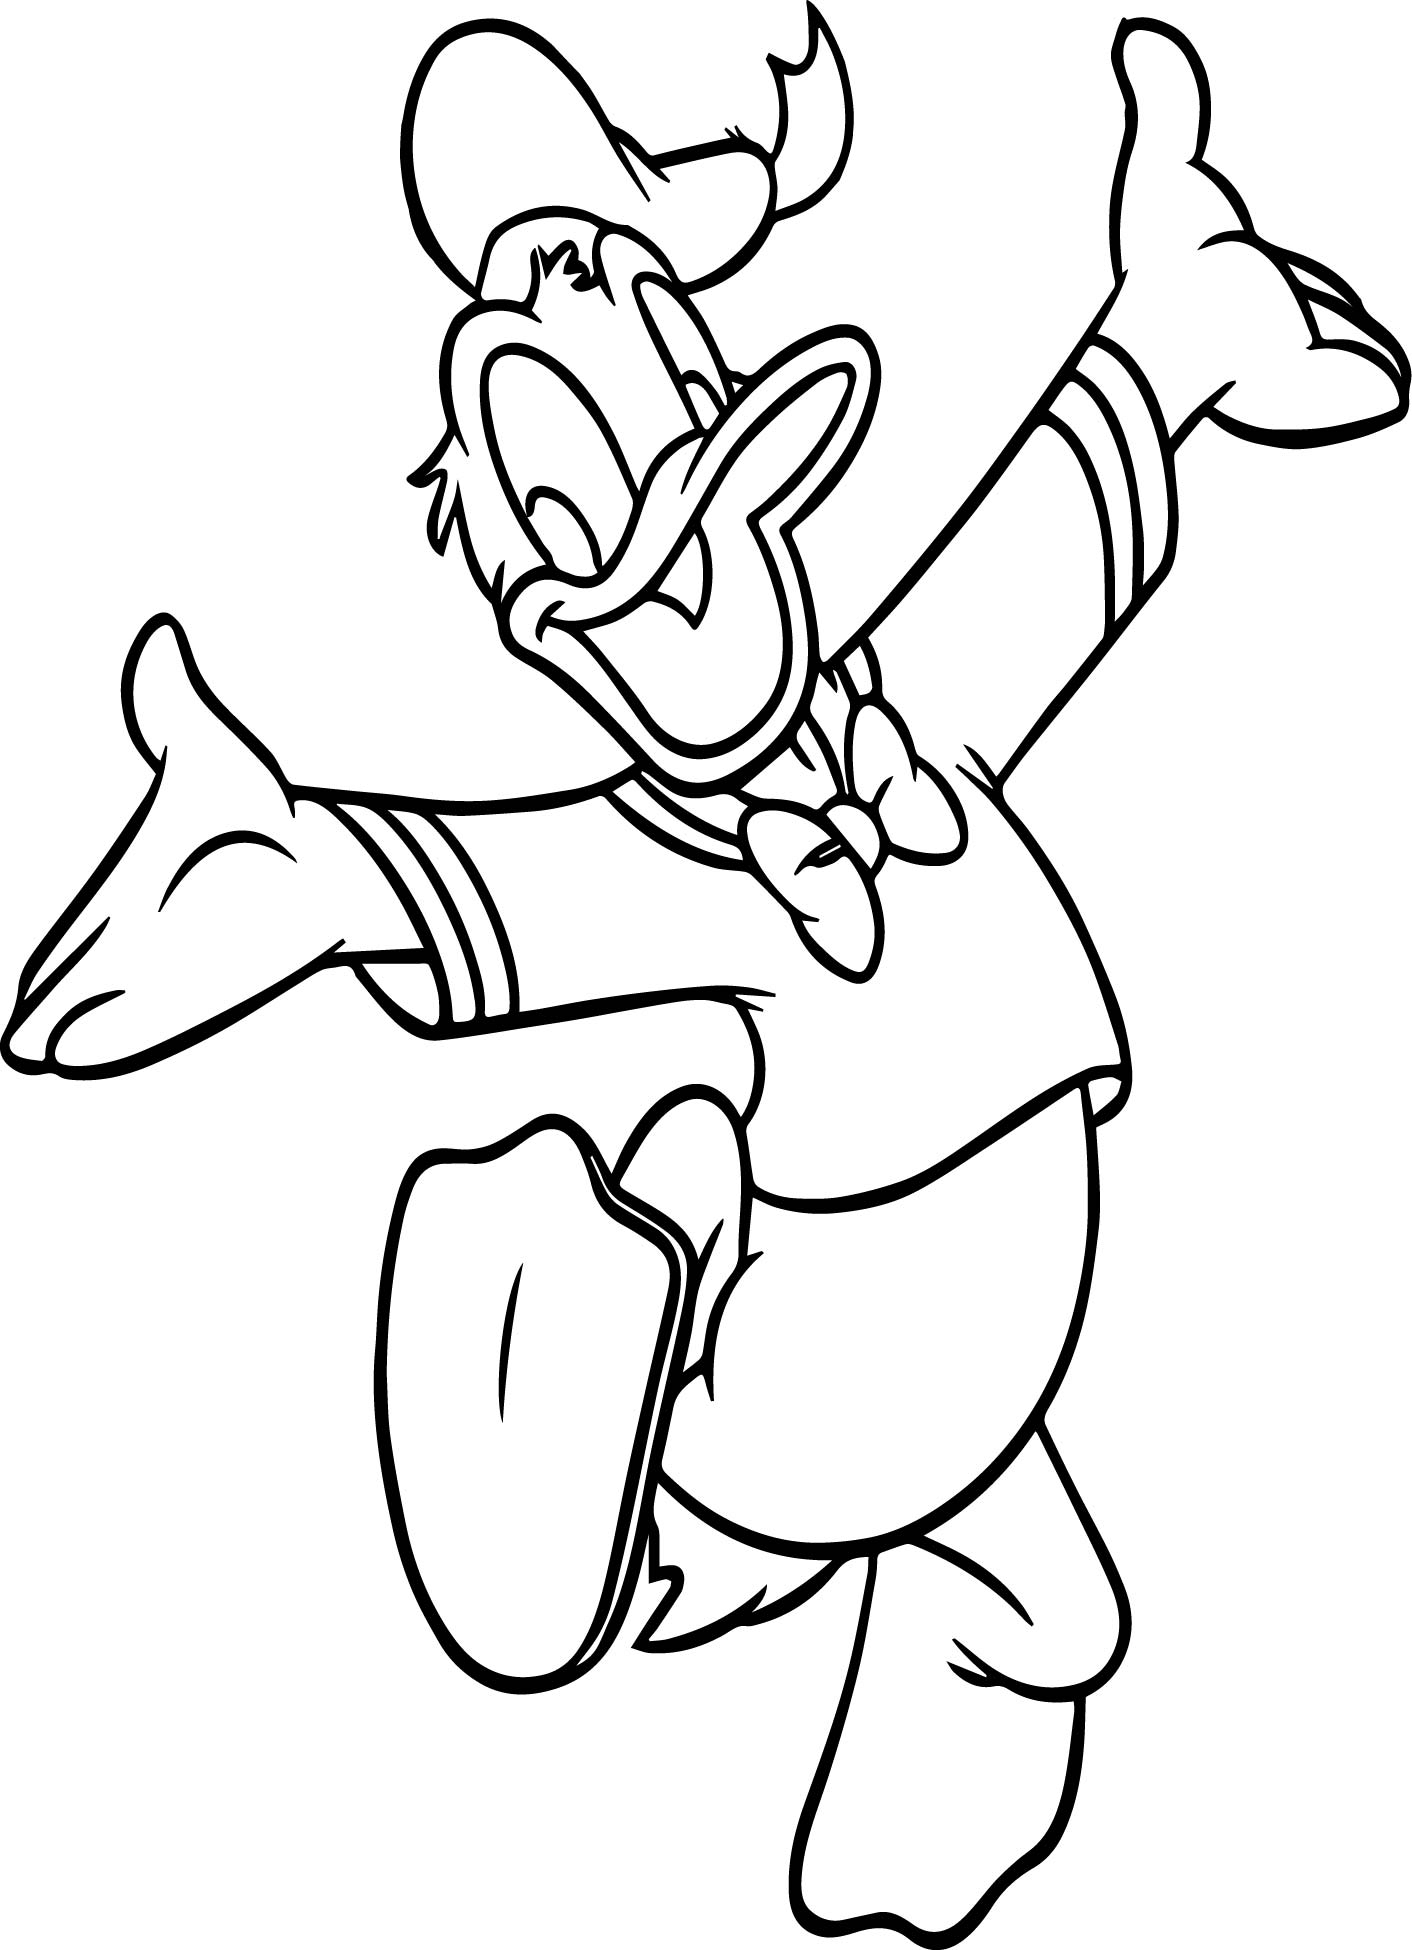 Walt Disney Characters Coloring Pages at GetColorings.com | Free